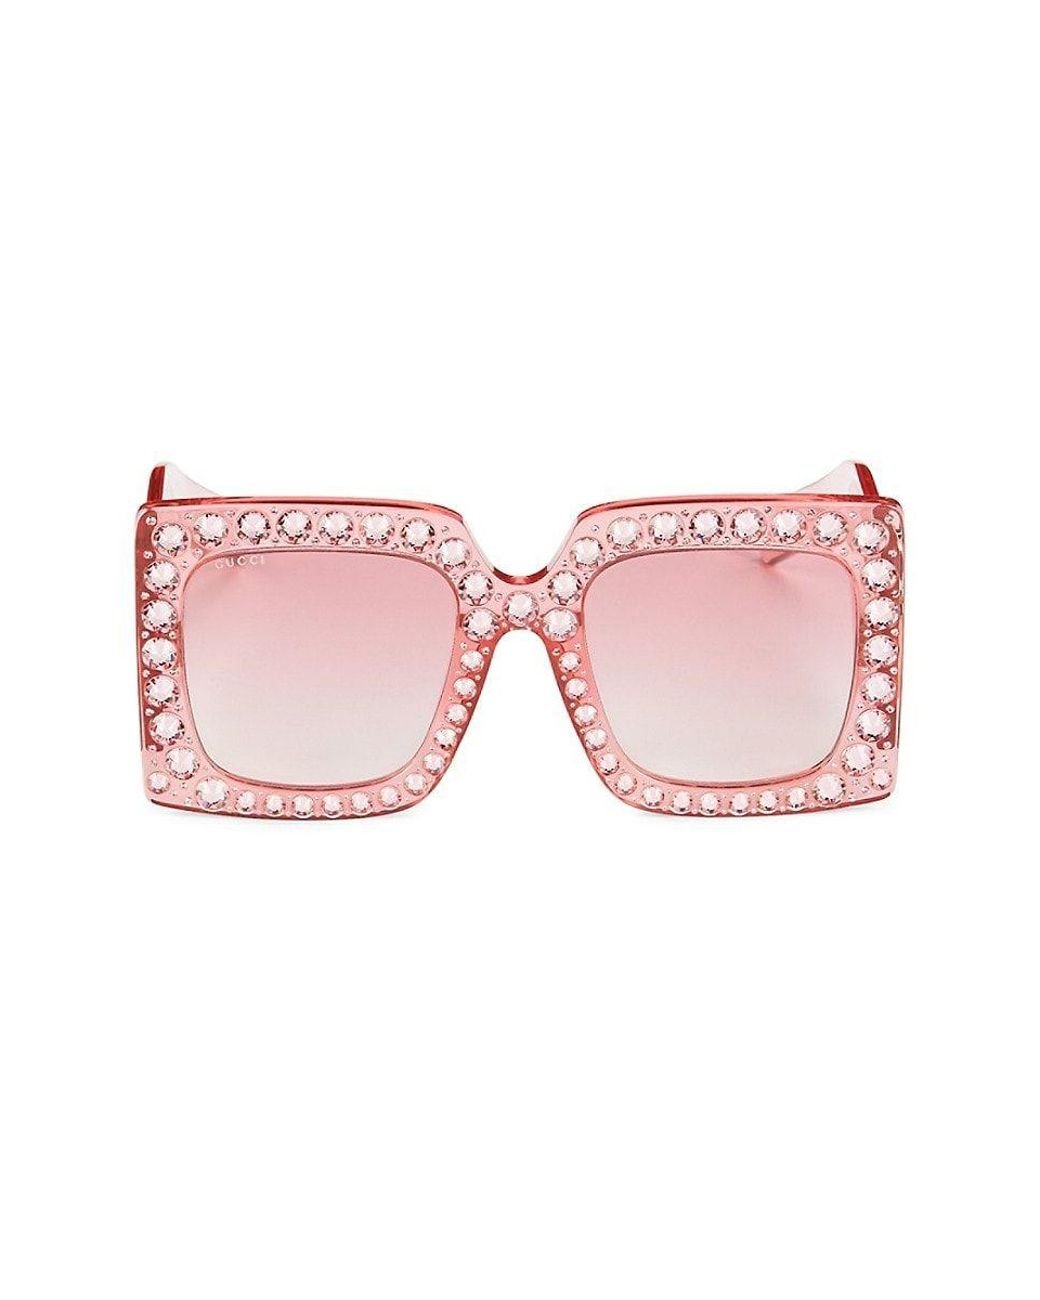 Rhinestone Sunglasses – Its All About Me